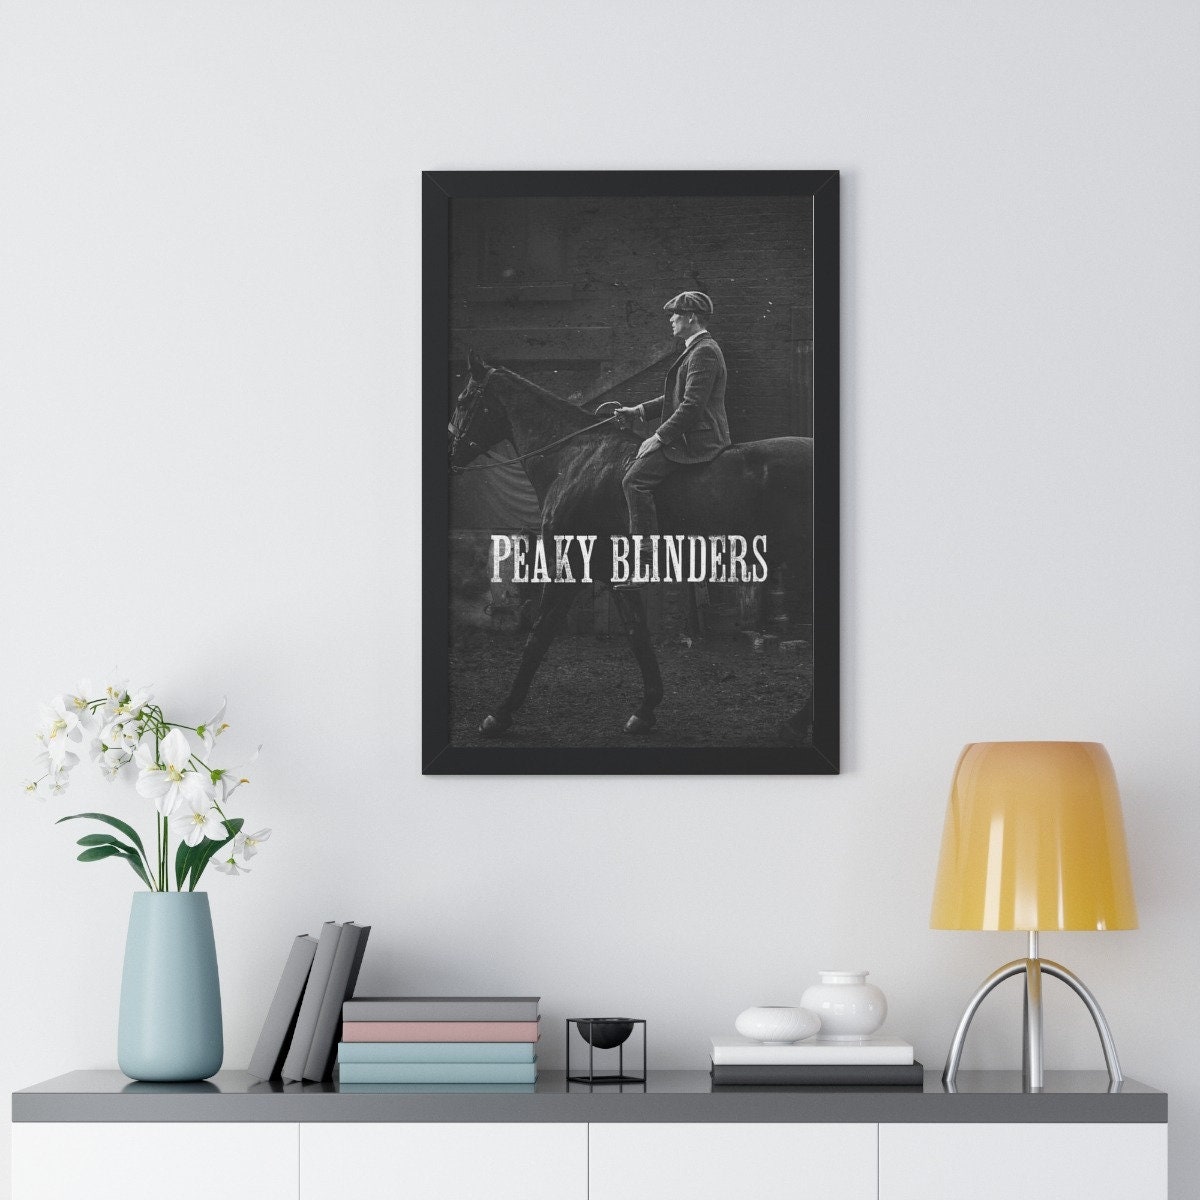 Peaky Blinders Poster - Thomas Shelby Poster